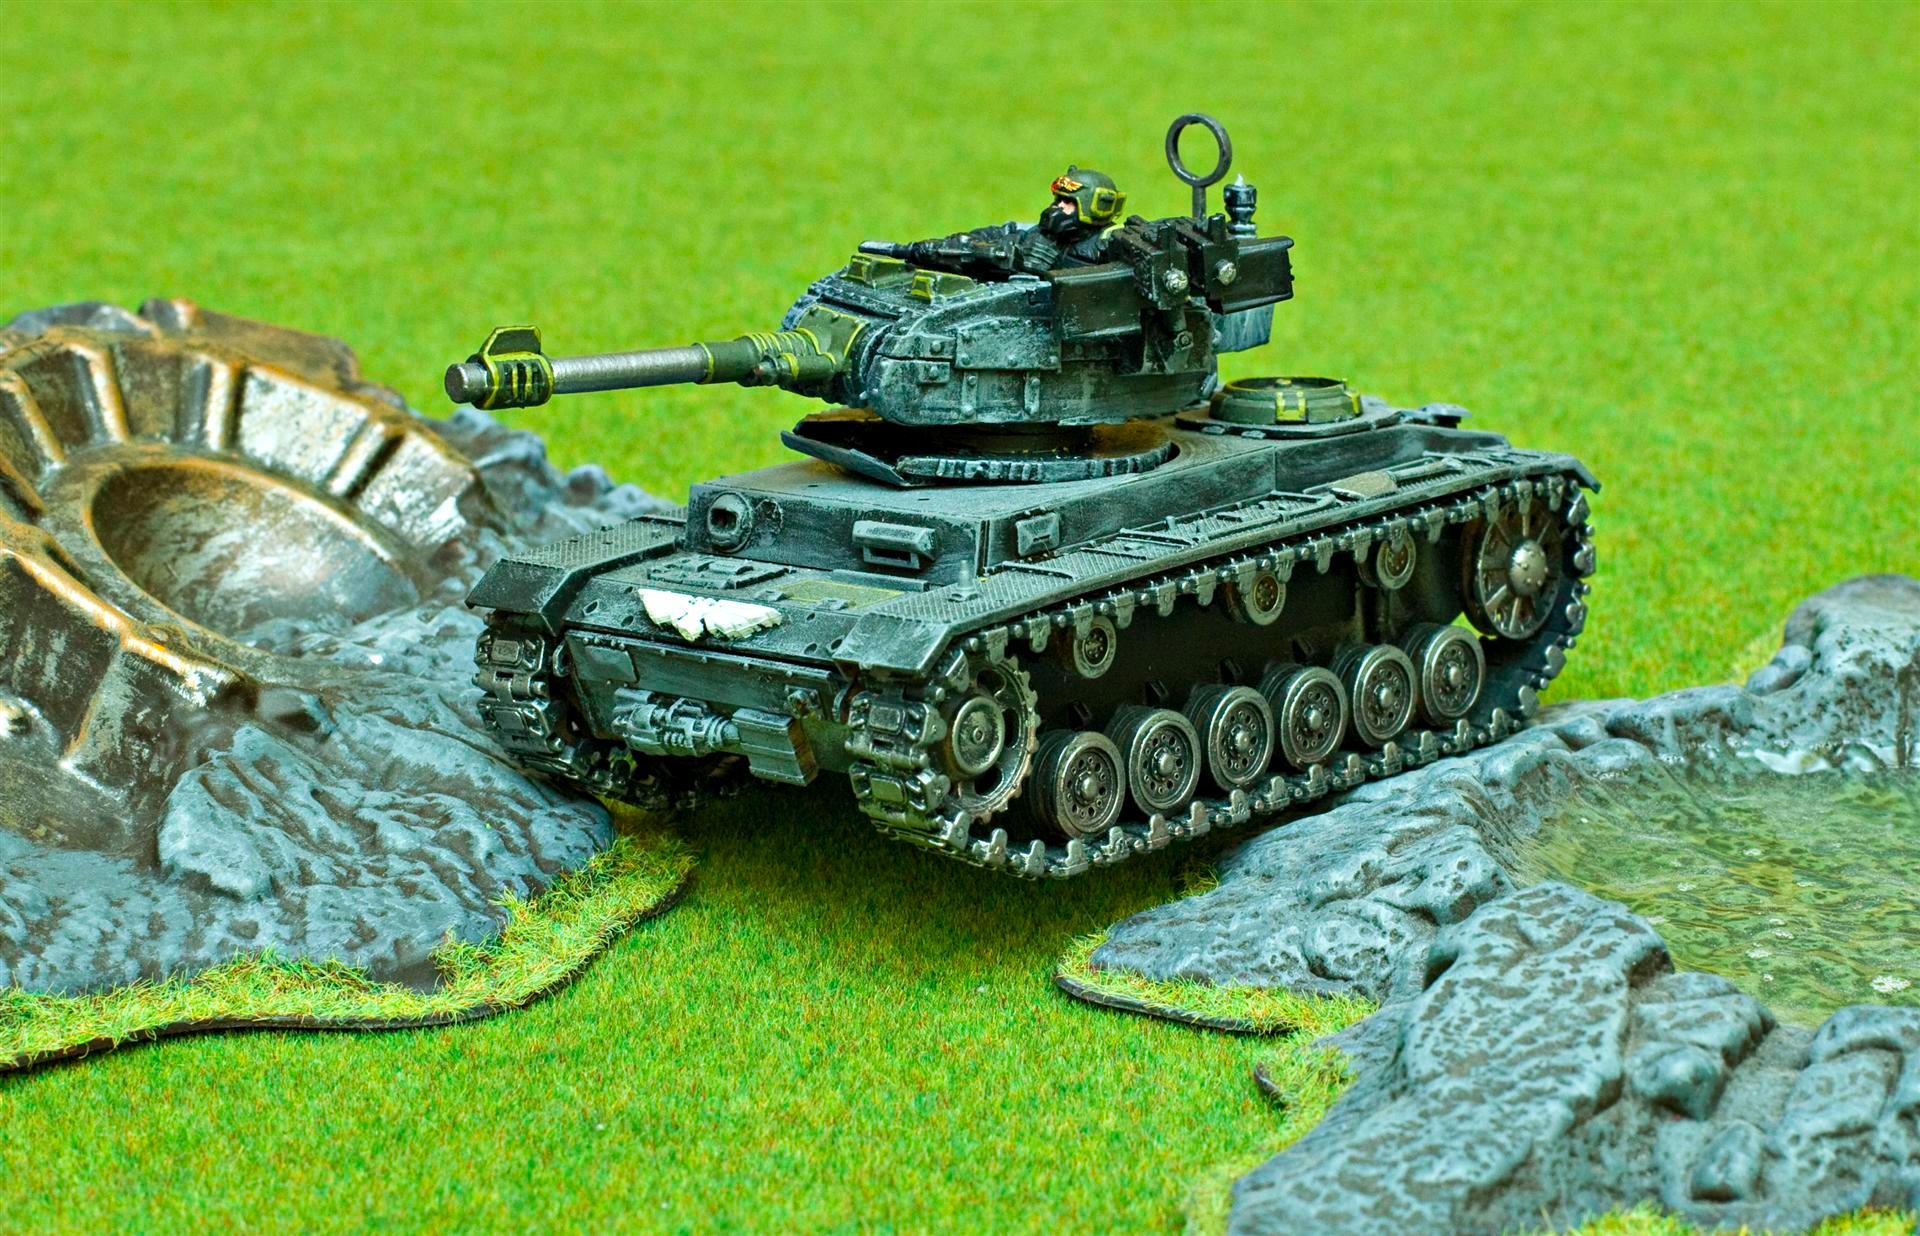 Apocalypse, Army, Astra Militarum, Autocannon, Conversion, Count As, Gaming Mat, Green, Grey, Guard, Imperial, Imperial Guard, Imperials, Tank, Tread, Treads, Ww2 Tank